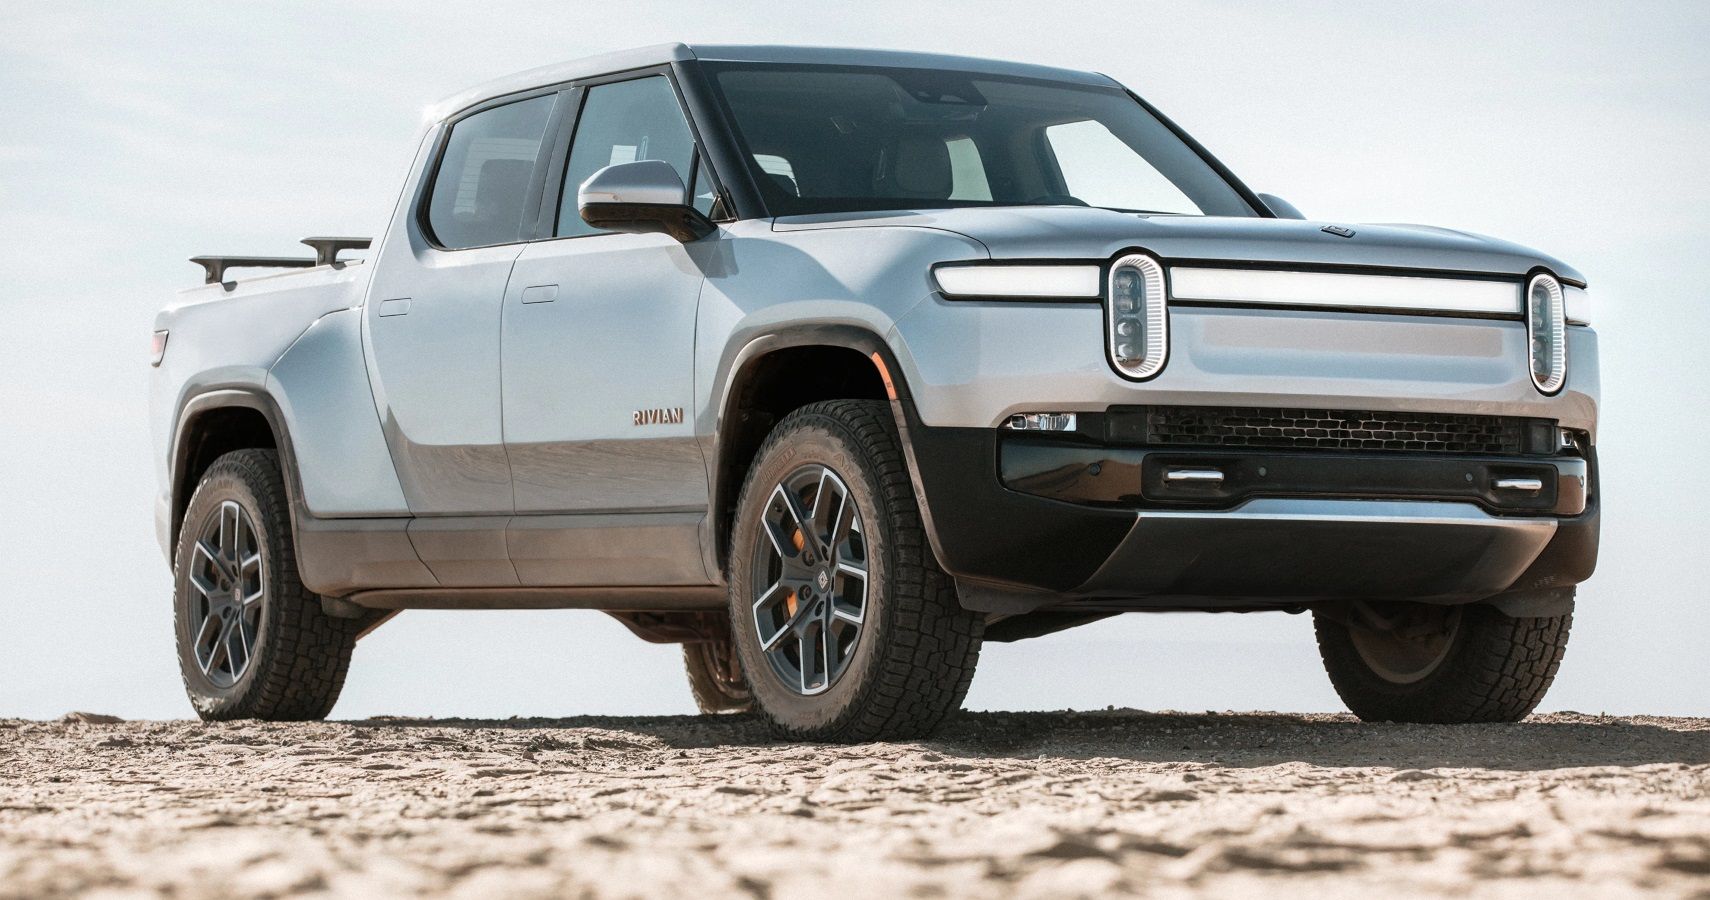 $80 Billion IPO In The Works For EV Automaker Rivian